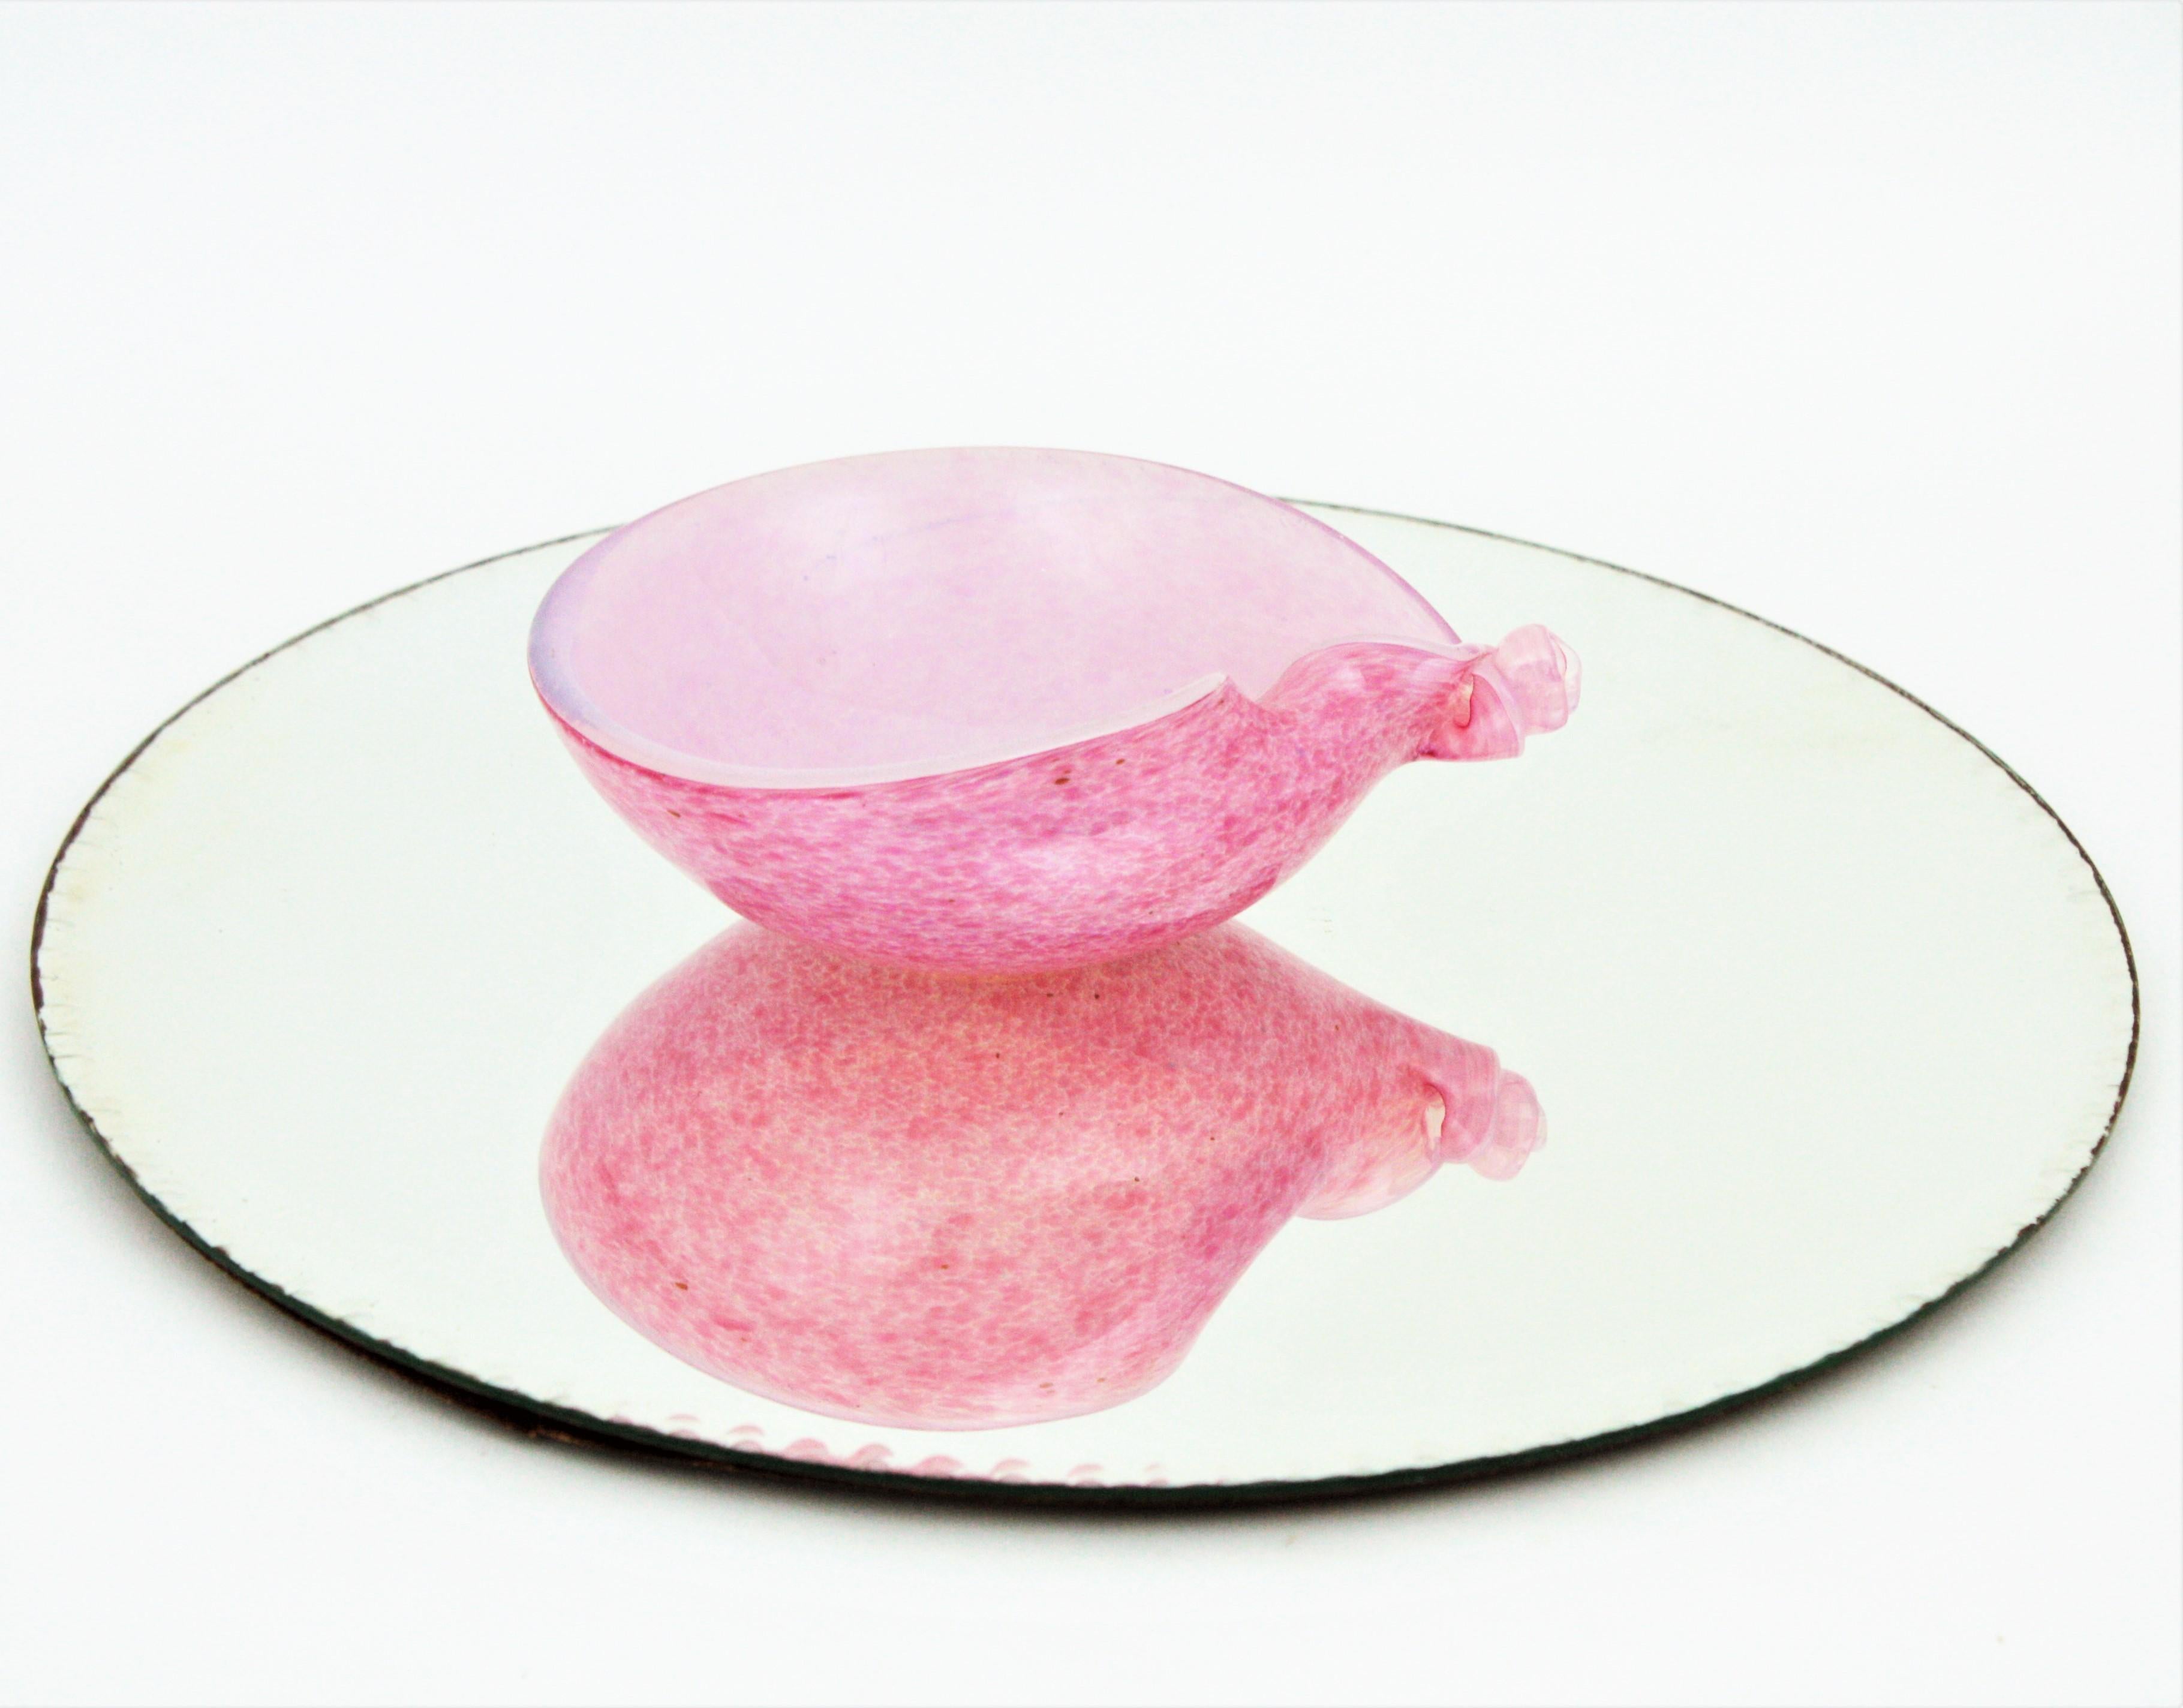 Archimede Seguso Murano Glass Opalescent Pink White Sea Shell Bowl, Italy, 1960s For Sale 1